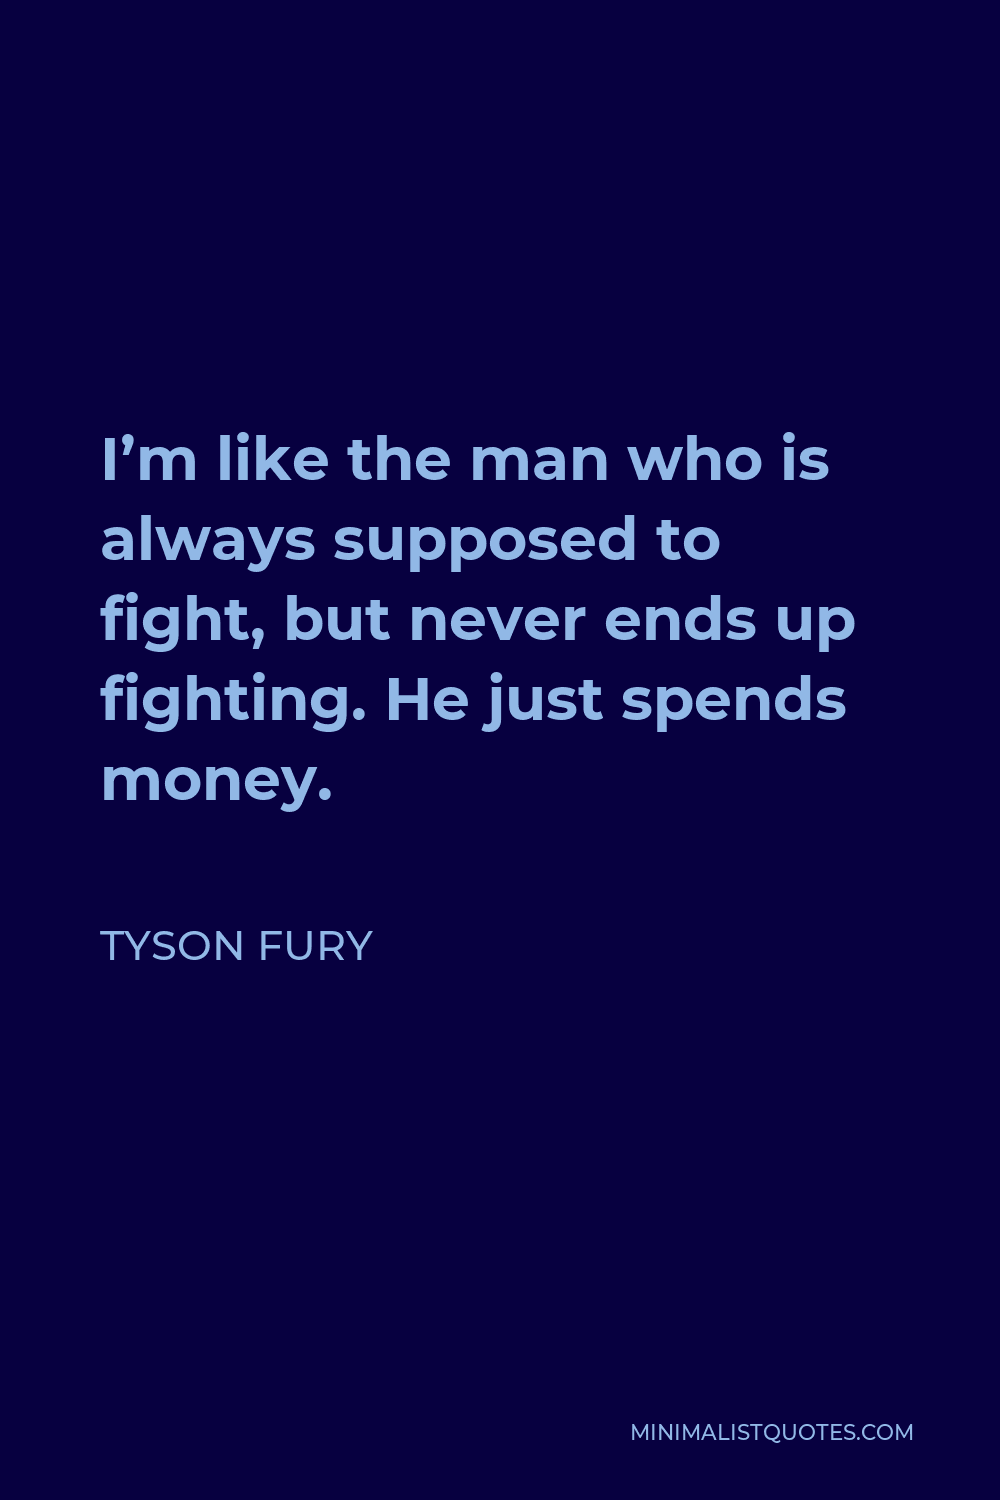 Tyson Fury Quote - I’m like the man who is always supposed to fight, but never ends up fighting. He just spends money.